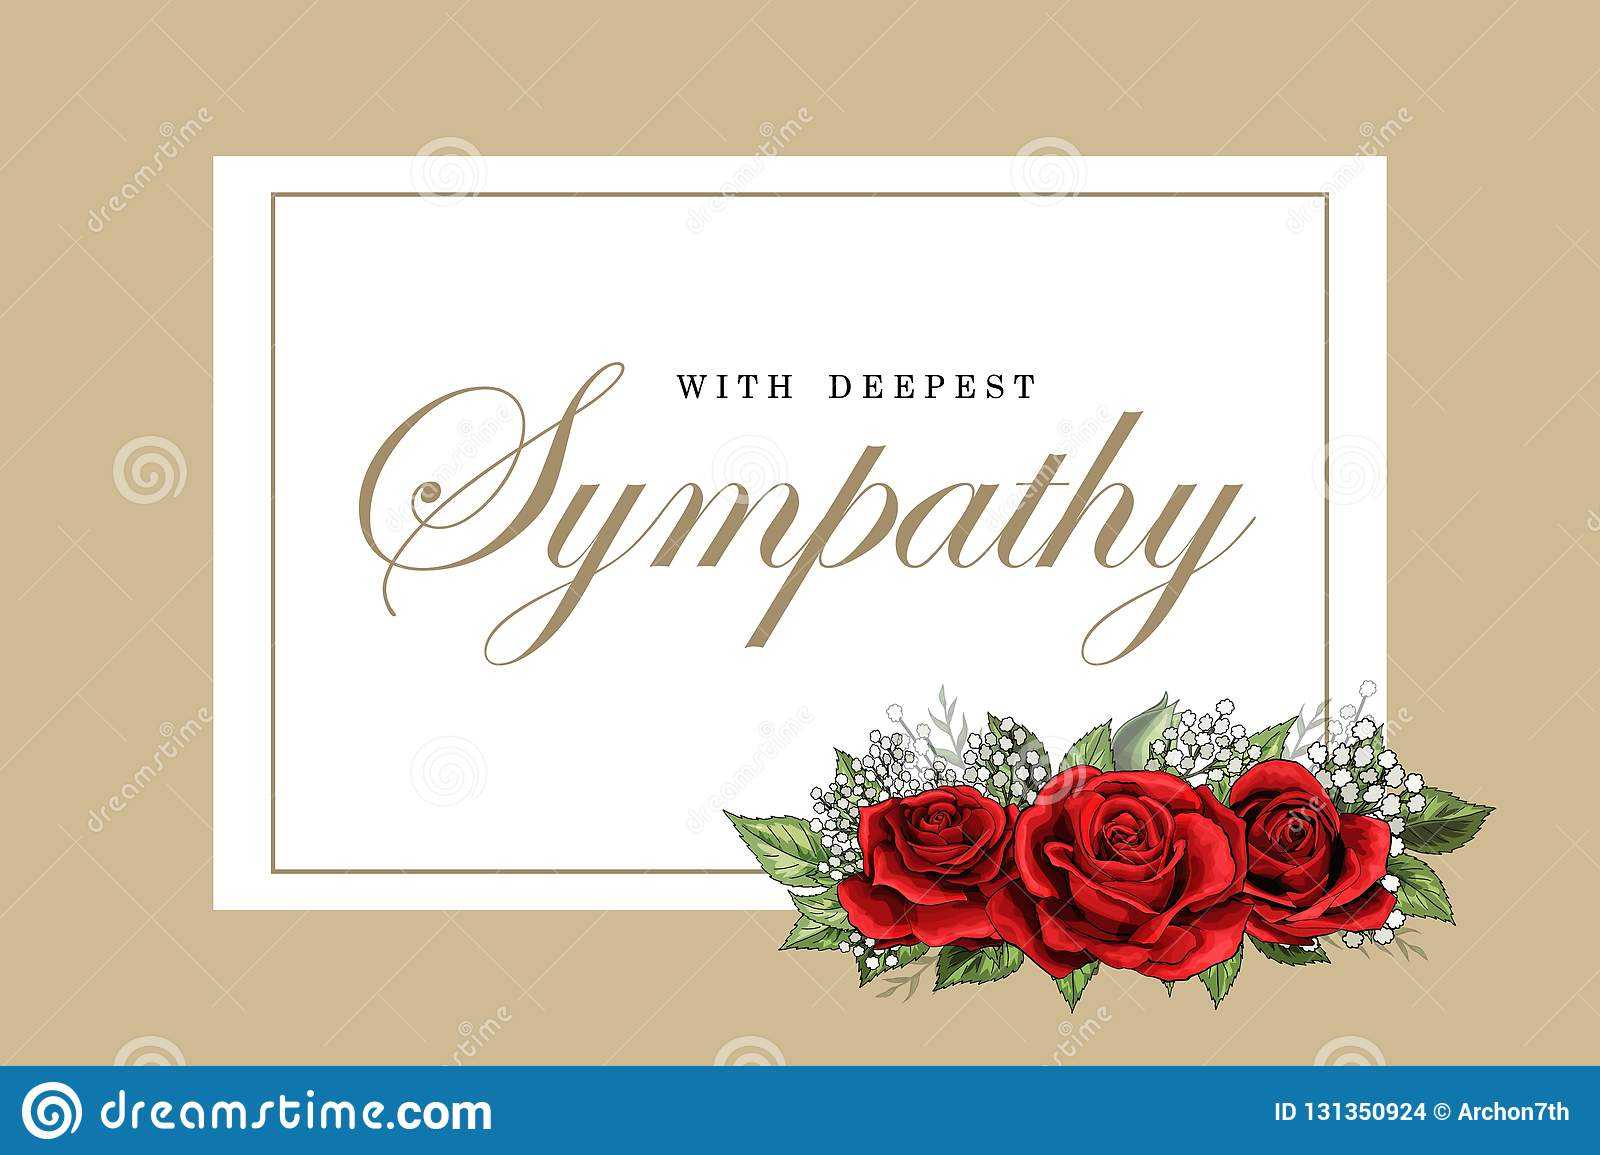 Condolences Sympathy Card Floral Red Roses Bouquet And In Sympathy Card Template